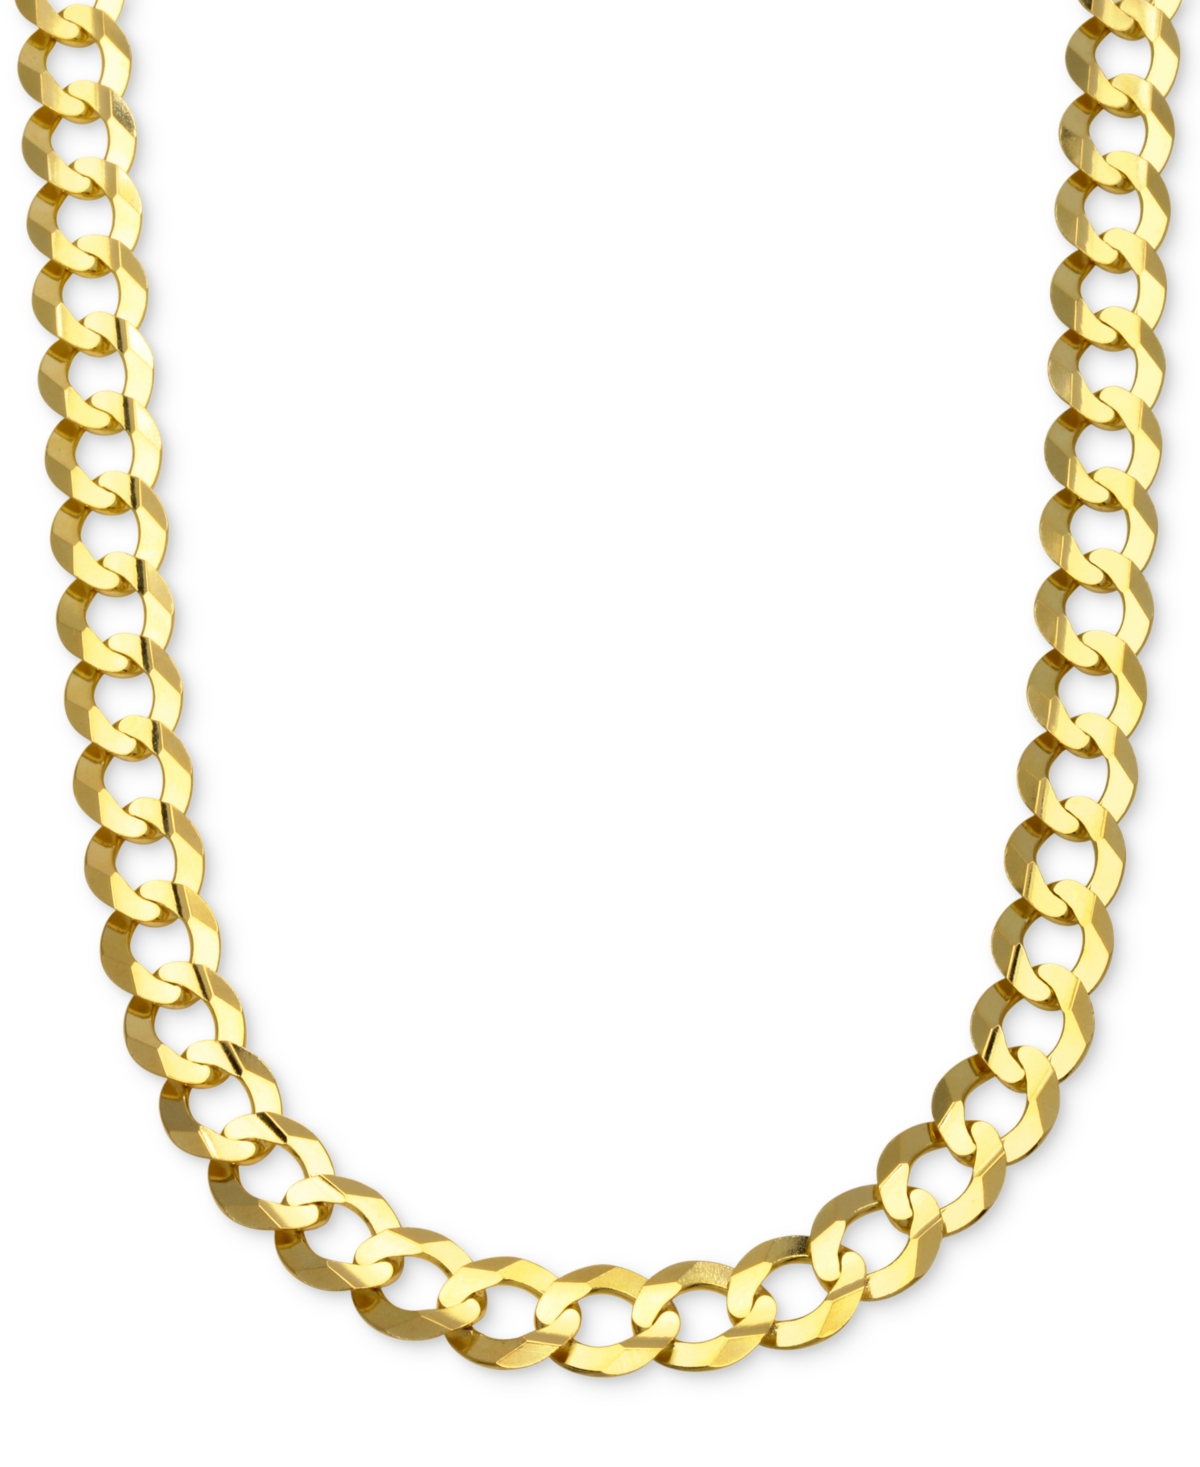 22" Curb Link Chain Necklace in Solid 10k Gold - Gold